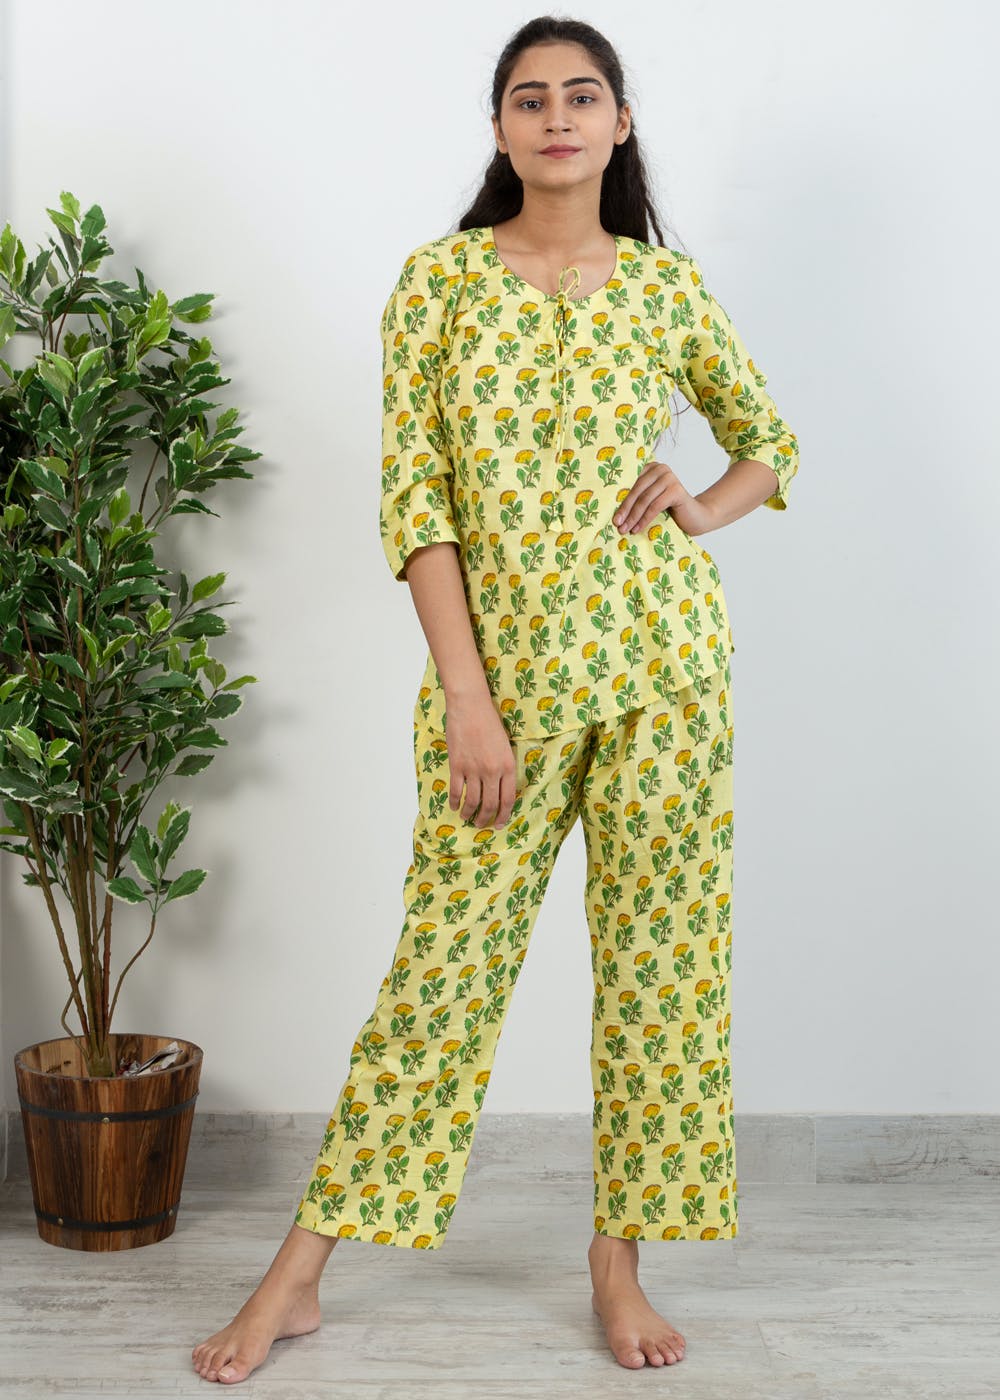 Get Yellow Floral Printed Keyhole Neck Lounge Set at ₹ 1799 | LBB Shop